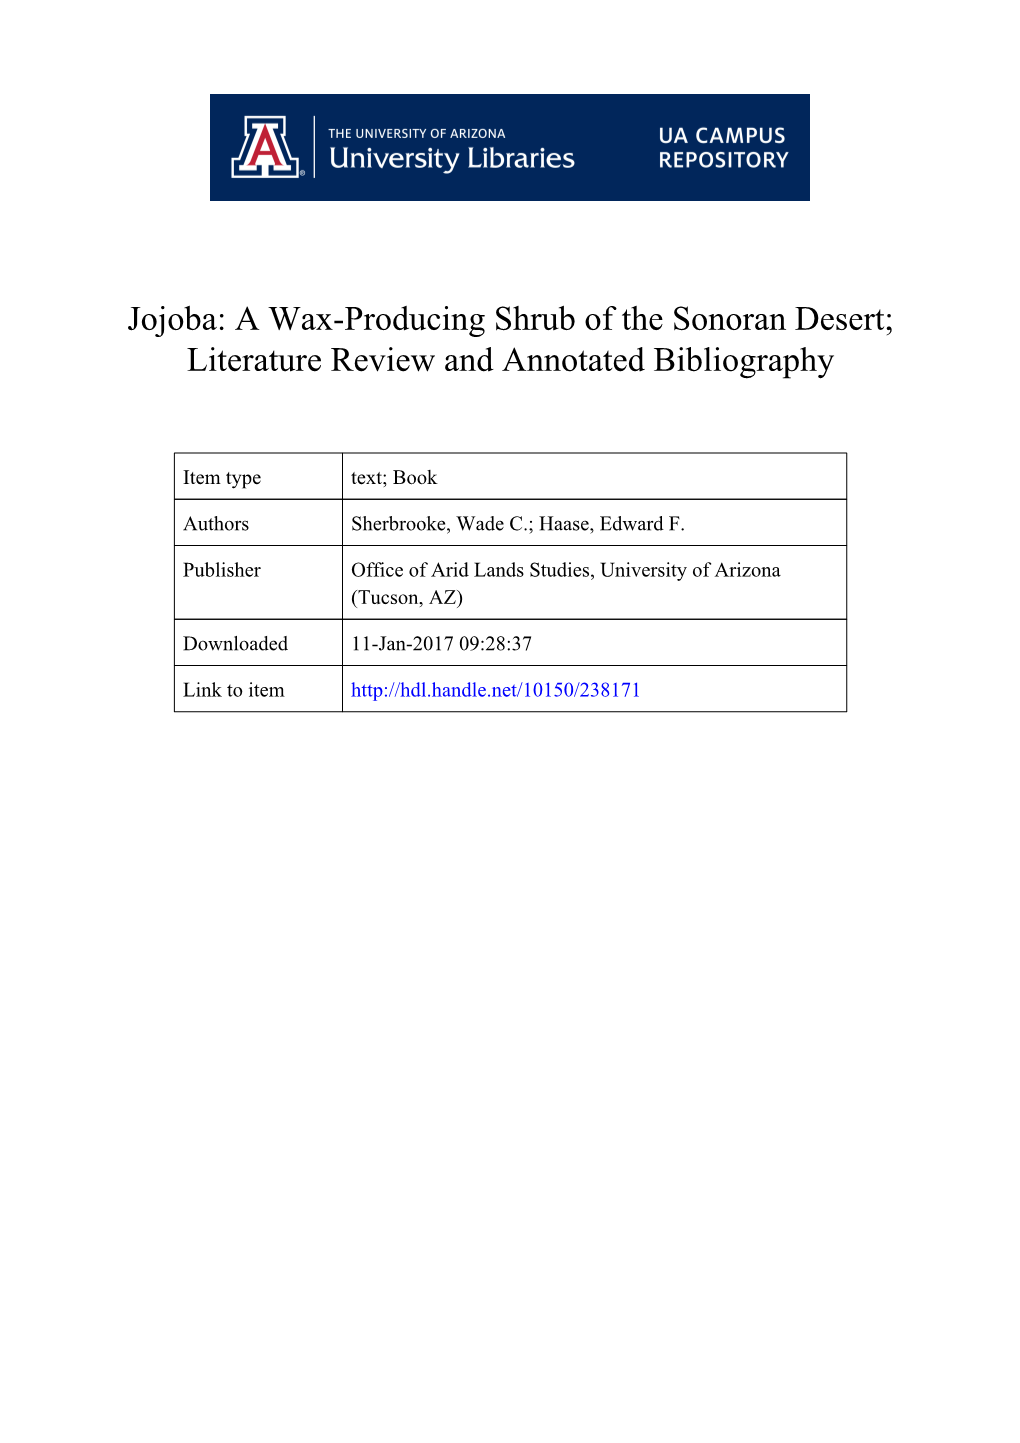 Jojoba: a Wax-Producing Shrub of the Sonoran Desert; Literature Review and Annotated Bibliography